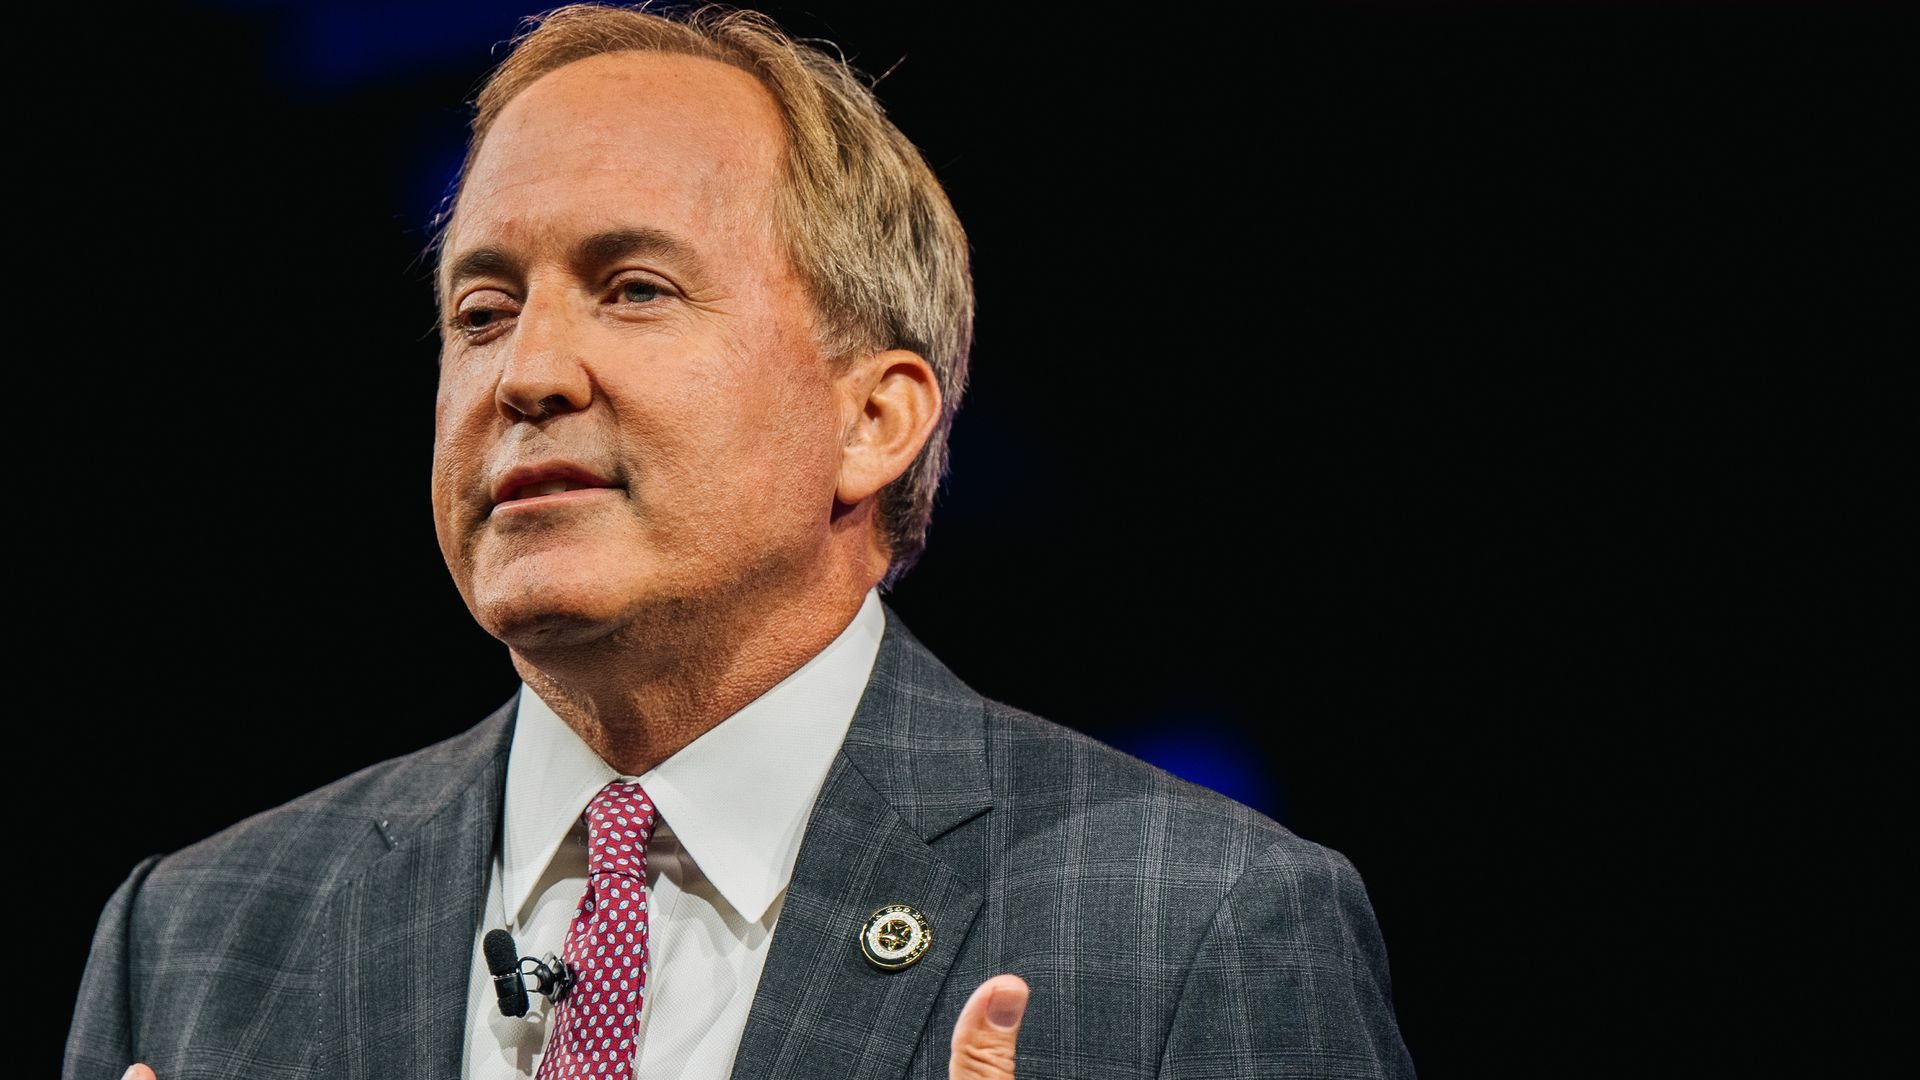 What to know about Texas AG Ken Paxton's impeachment